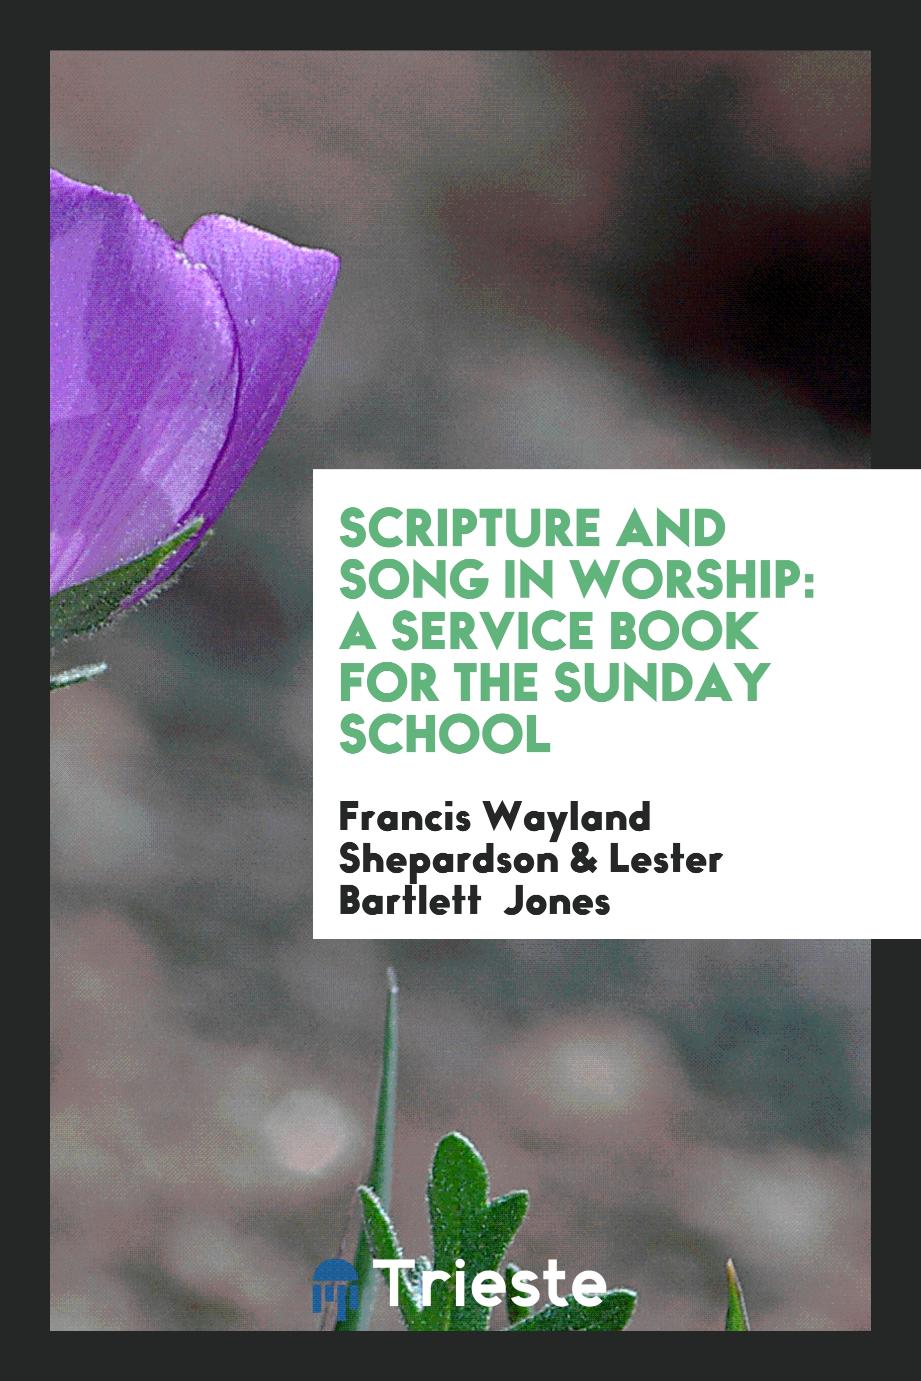 Scripture and Song in Worship: A Service Book for the Sunday School